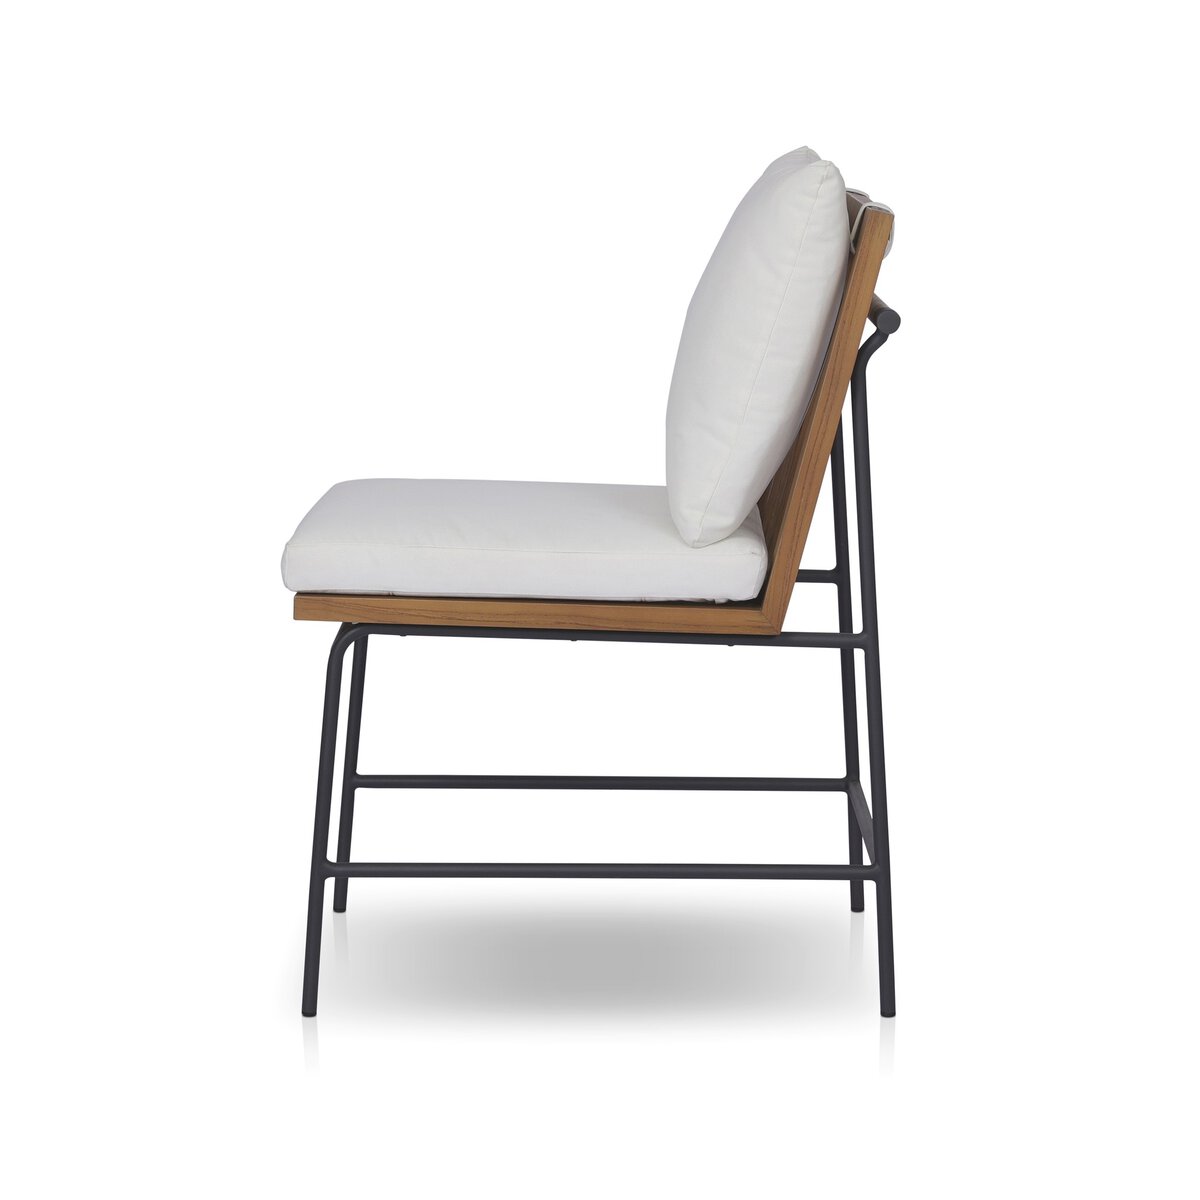 Cynthia Outdoor Dining Chair